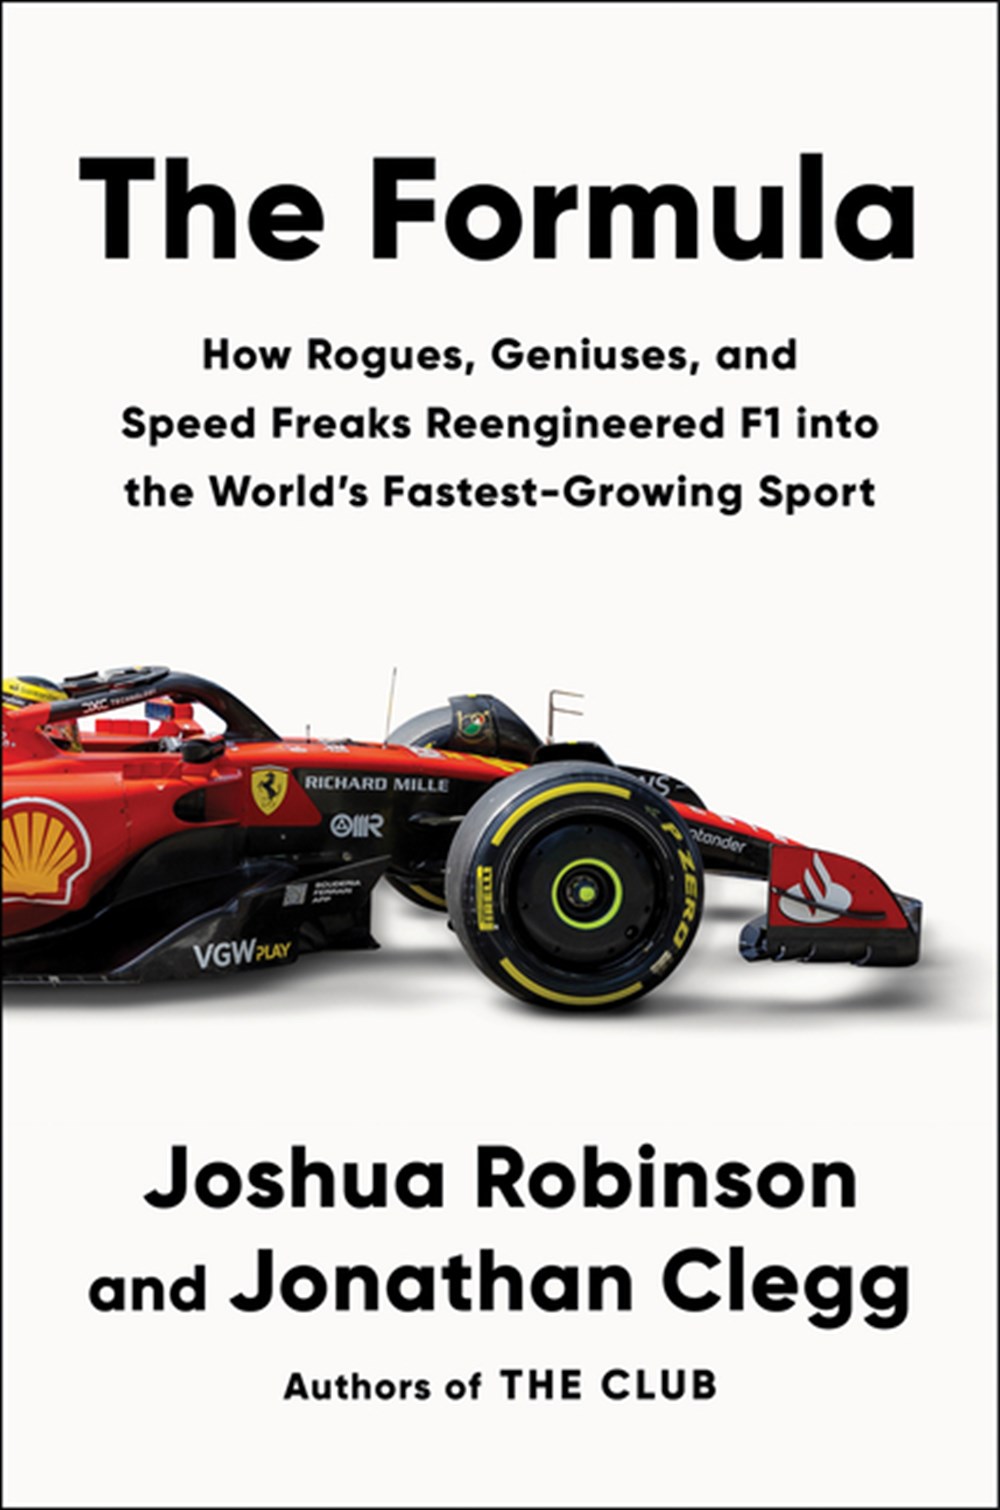 Formula: How Rogues, Geniuses, and Speed Freaks Reengineered F1 Into the World's Fastest-Growing Spo